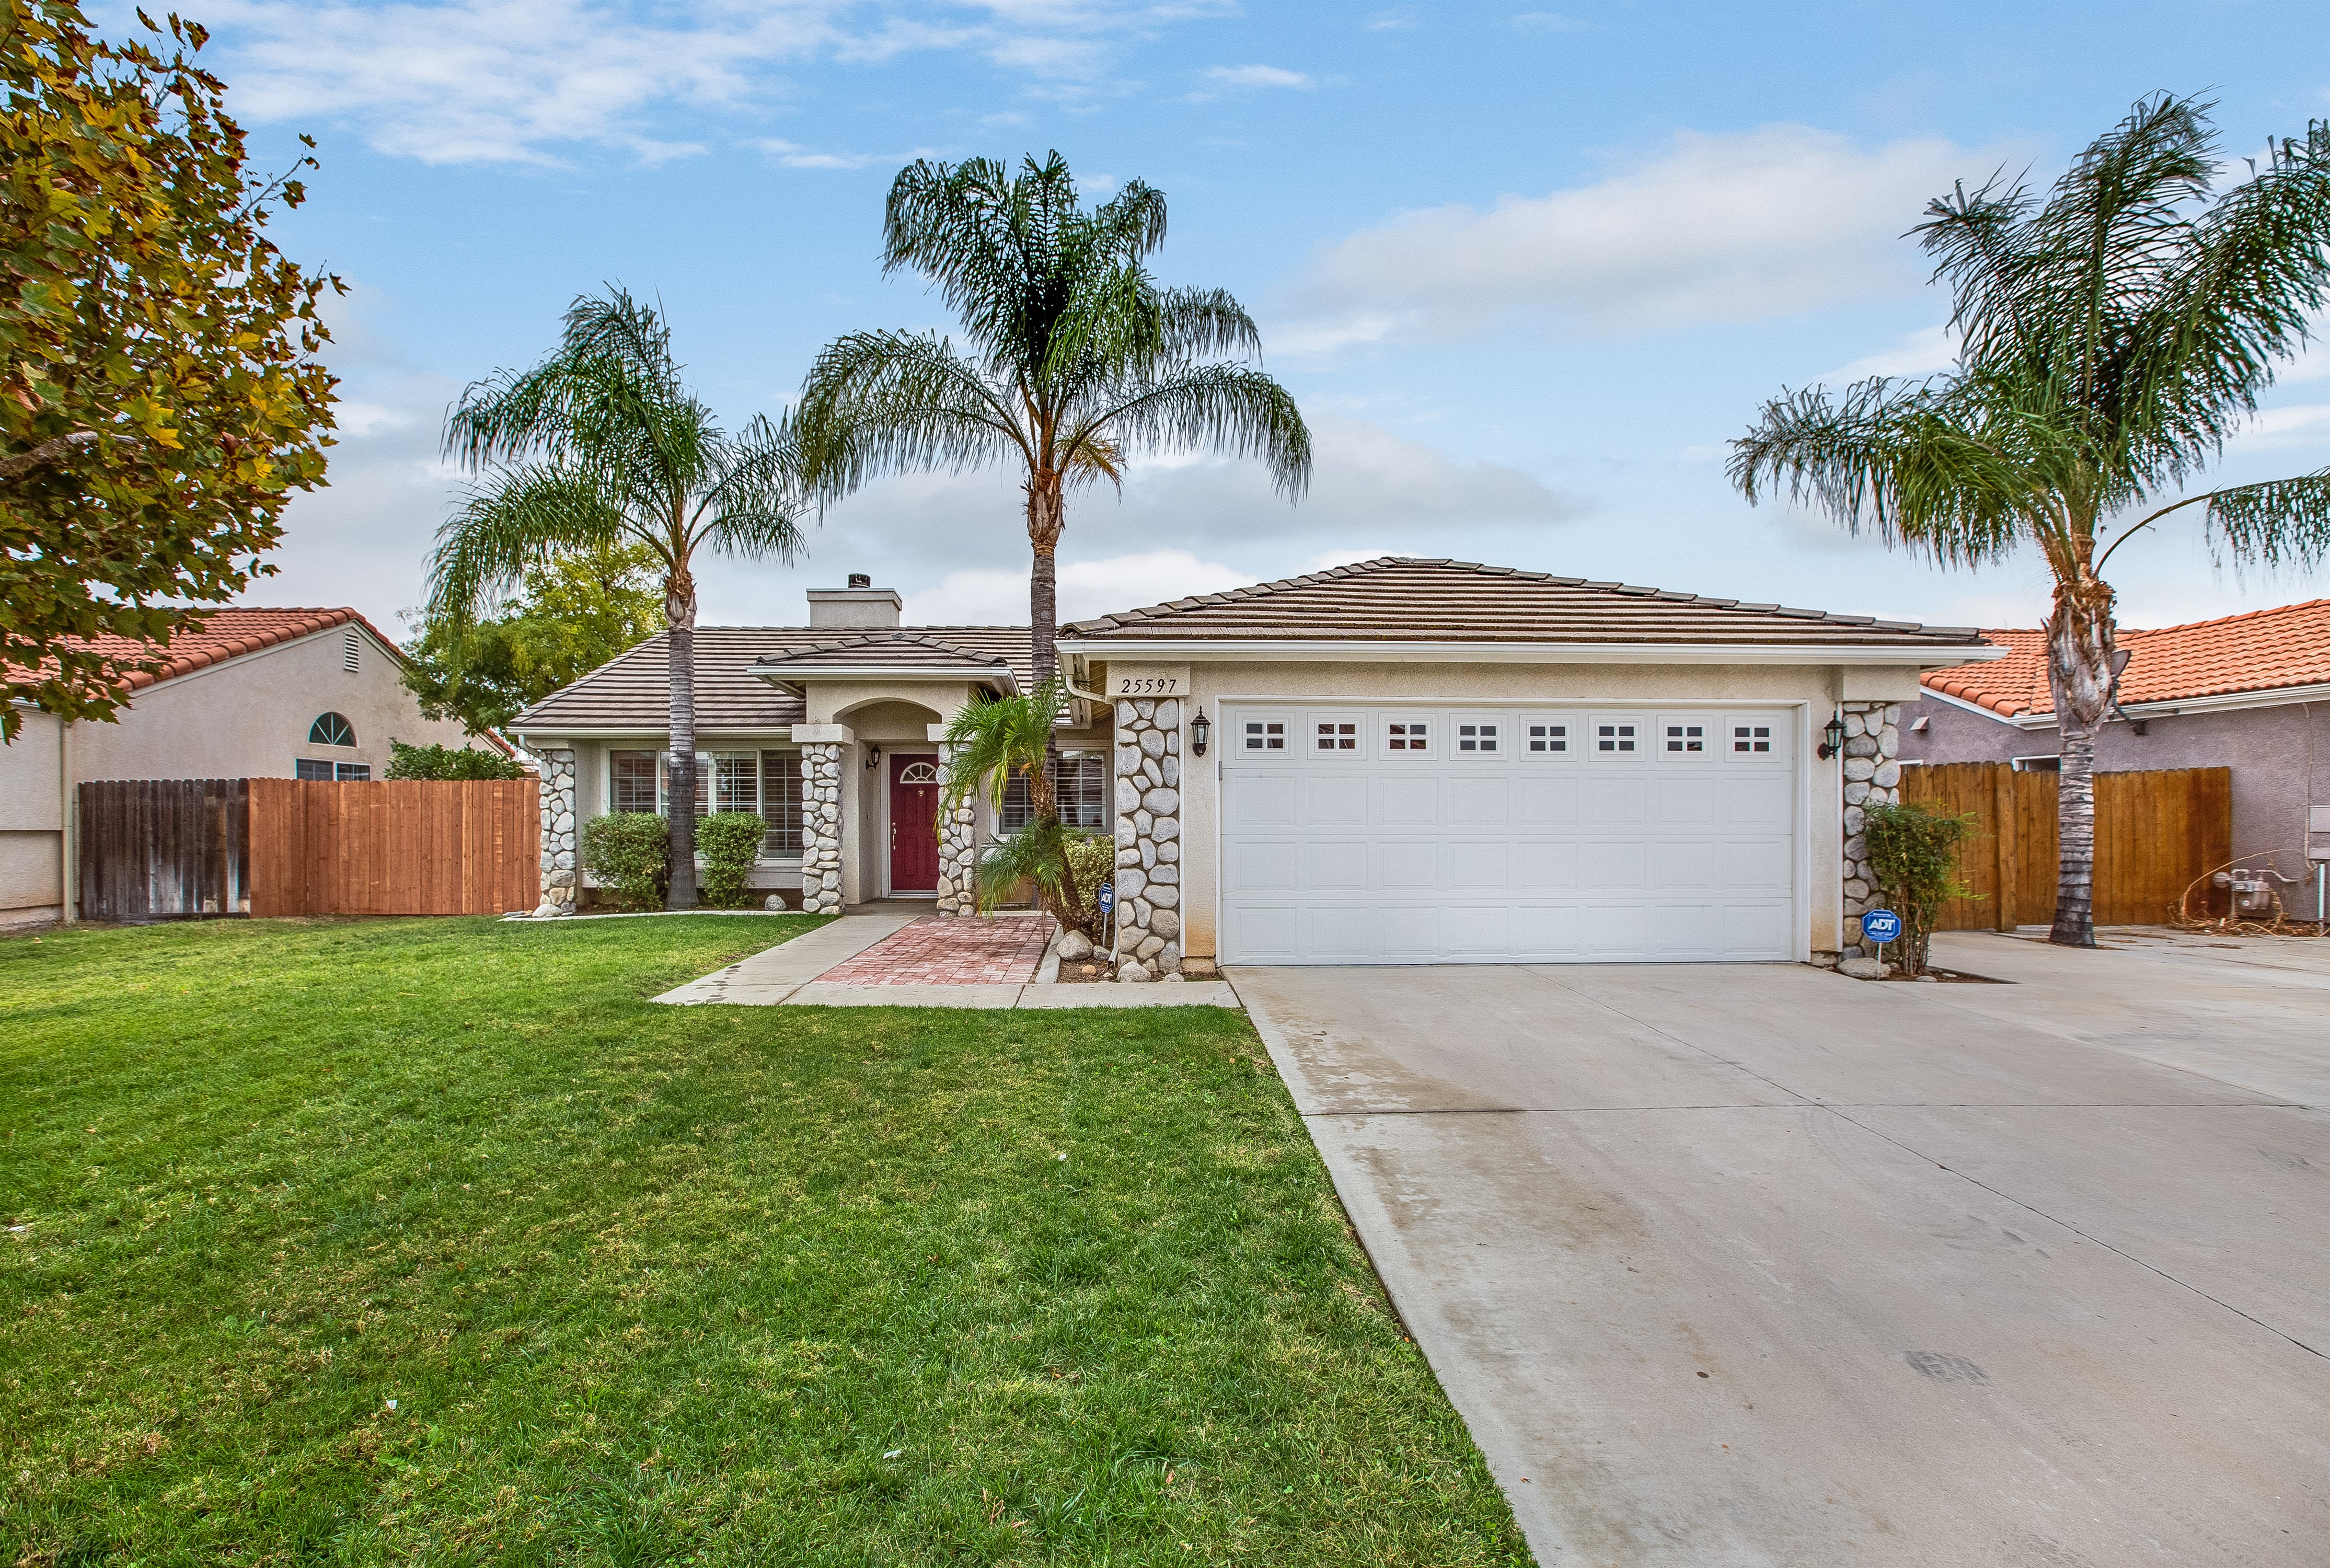 Great single family home, low tax, no HOA.  Listed and Sold same day in Menifee, CA. If you are thinking of Buying, or Selling Call Denise Gentile 951-751-1311 for professional results!